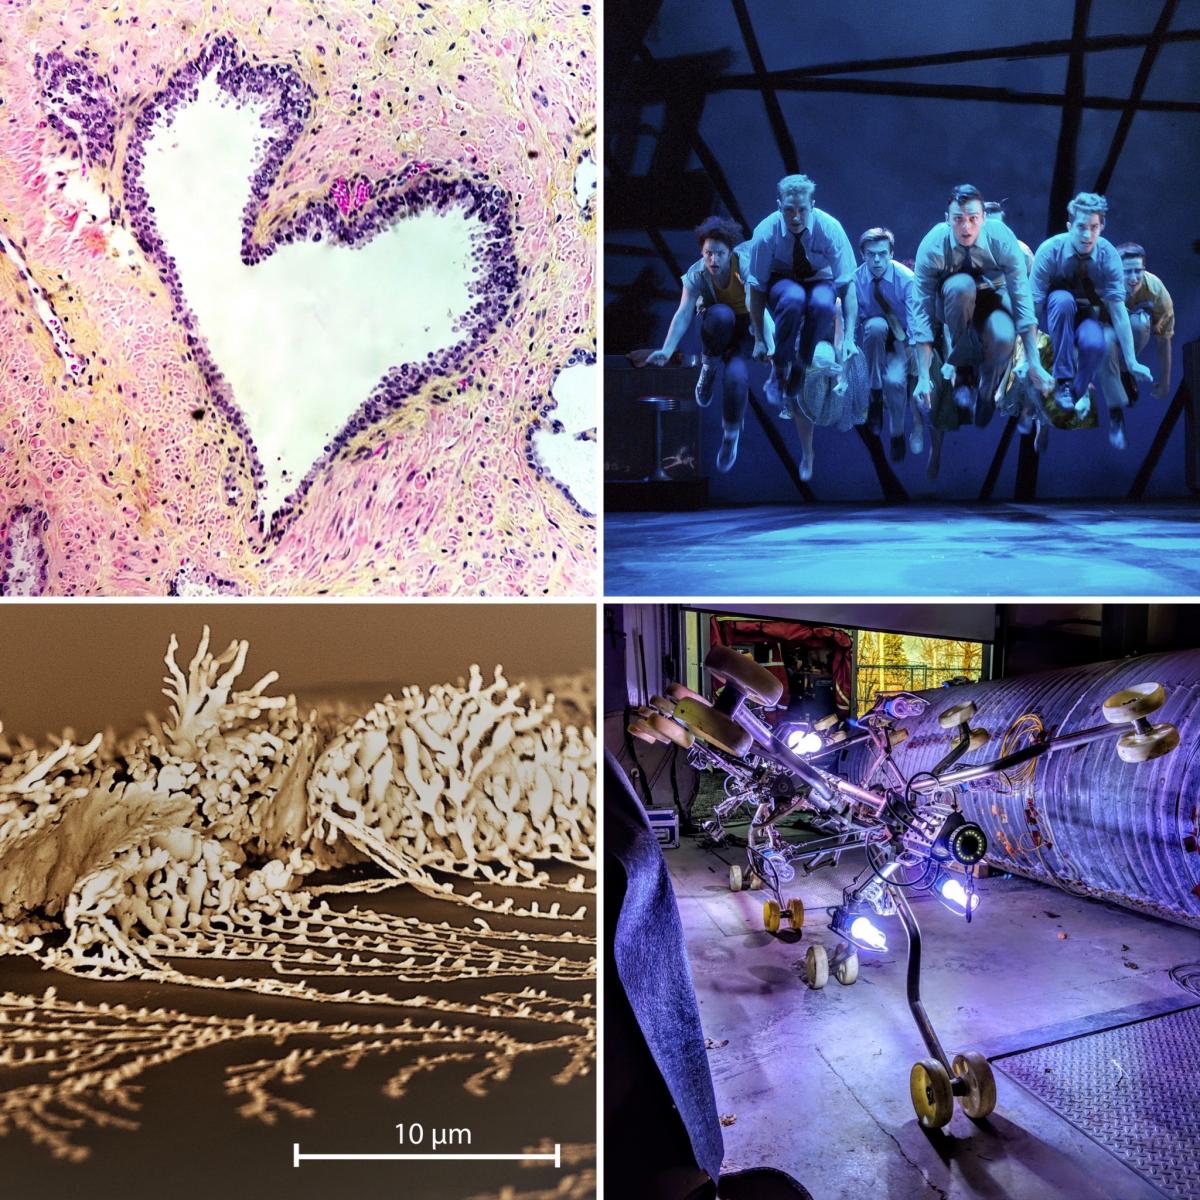 [4 winning images from the 2019 Art of Research photo contest]